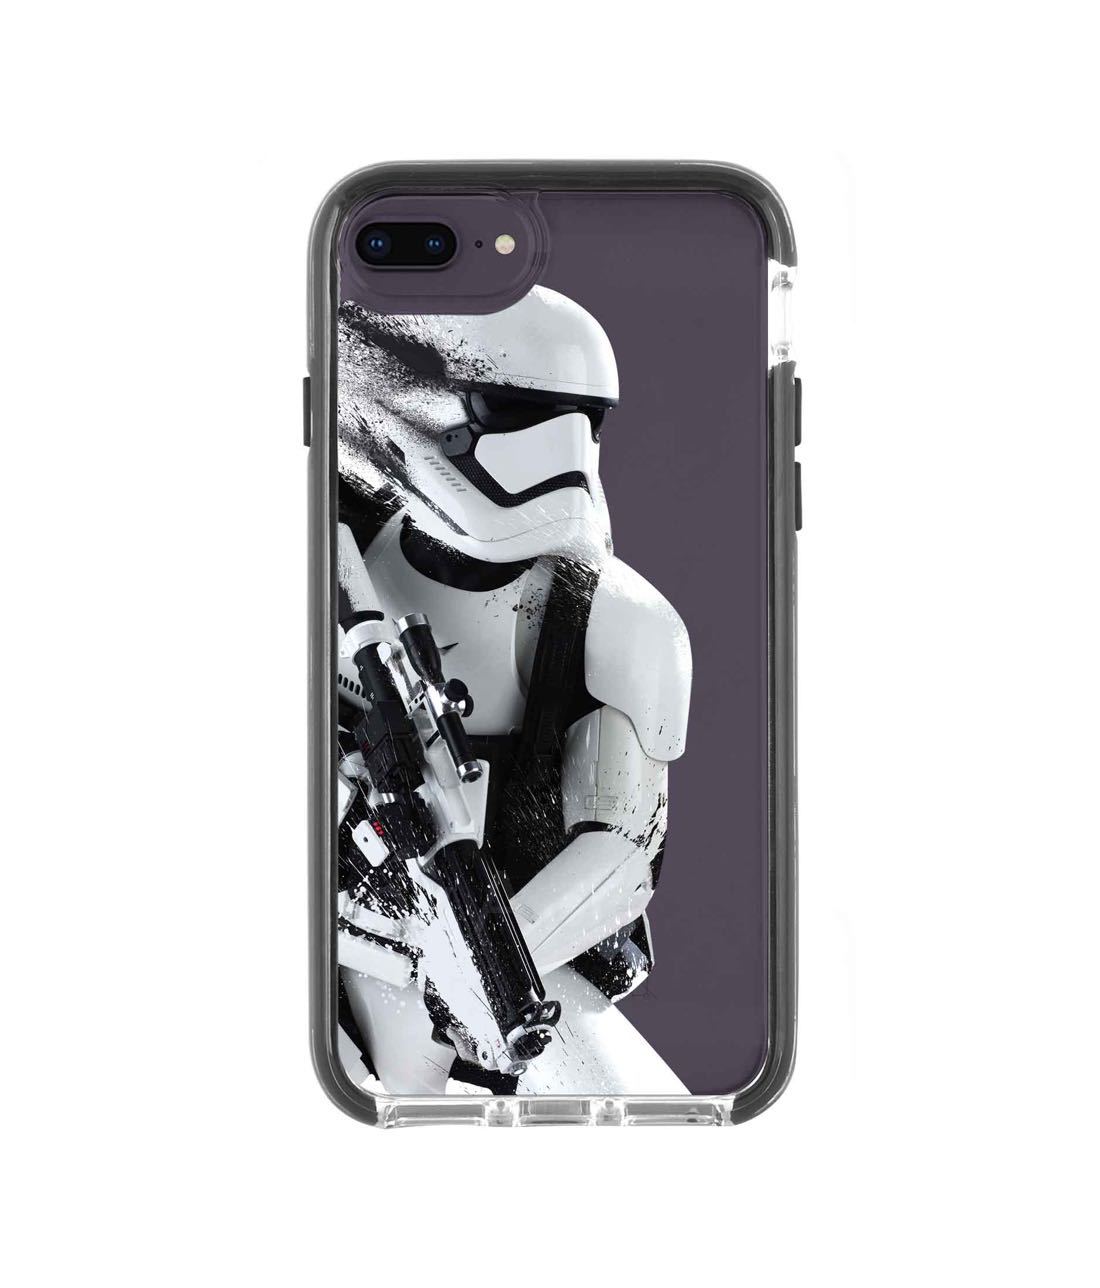 Trooper Storm - Extreme Phone Case for iPhone 8 Plus